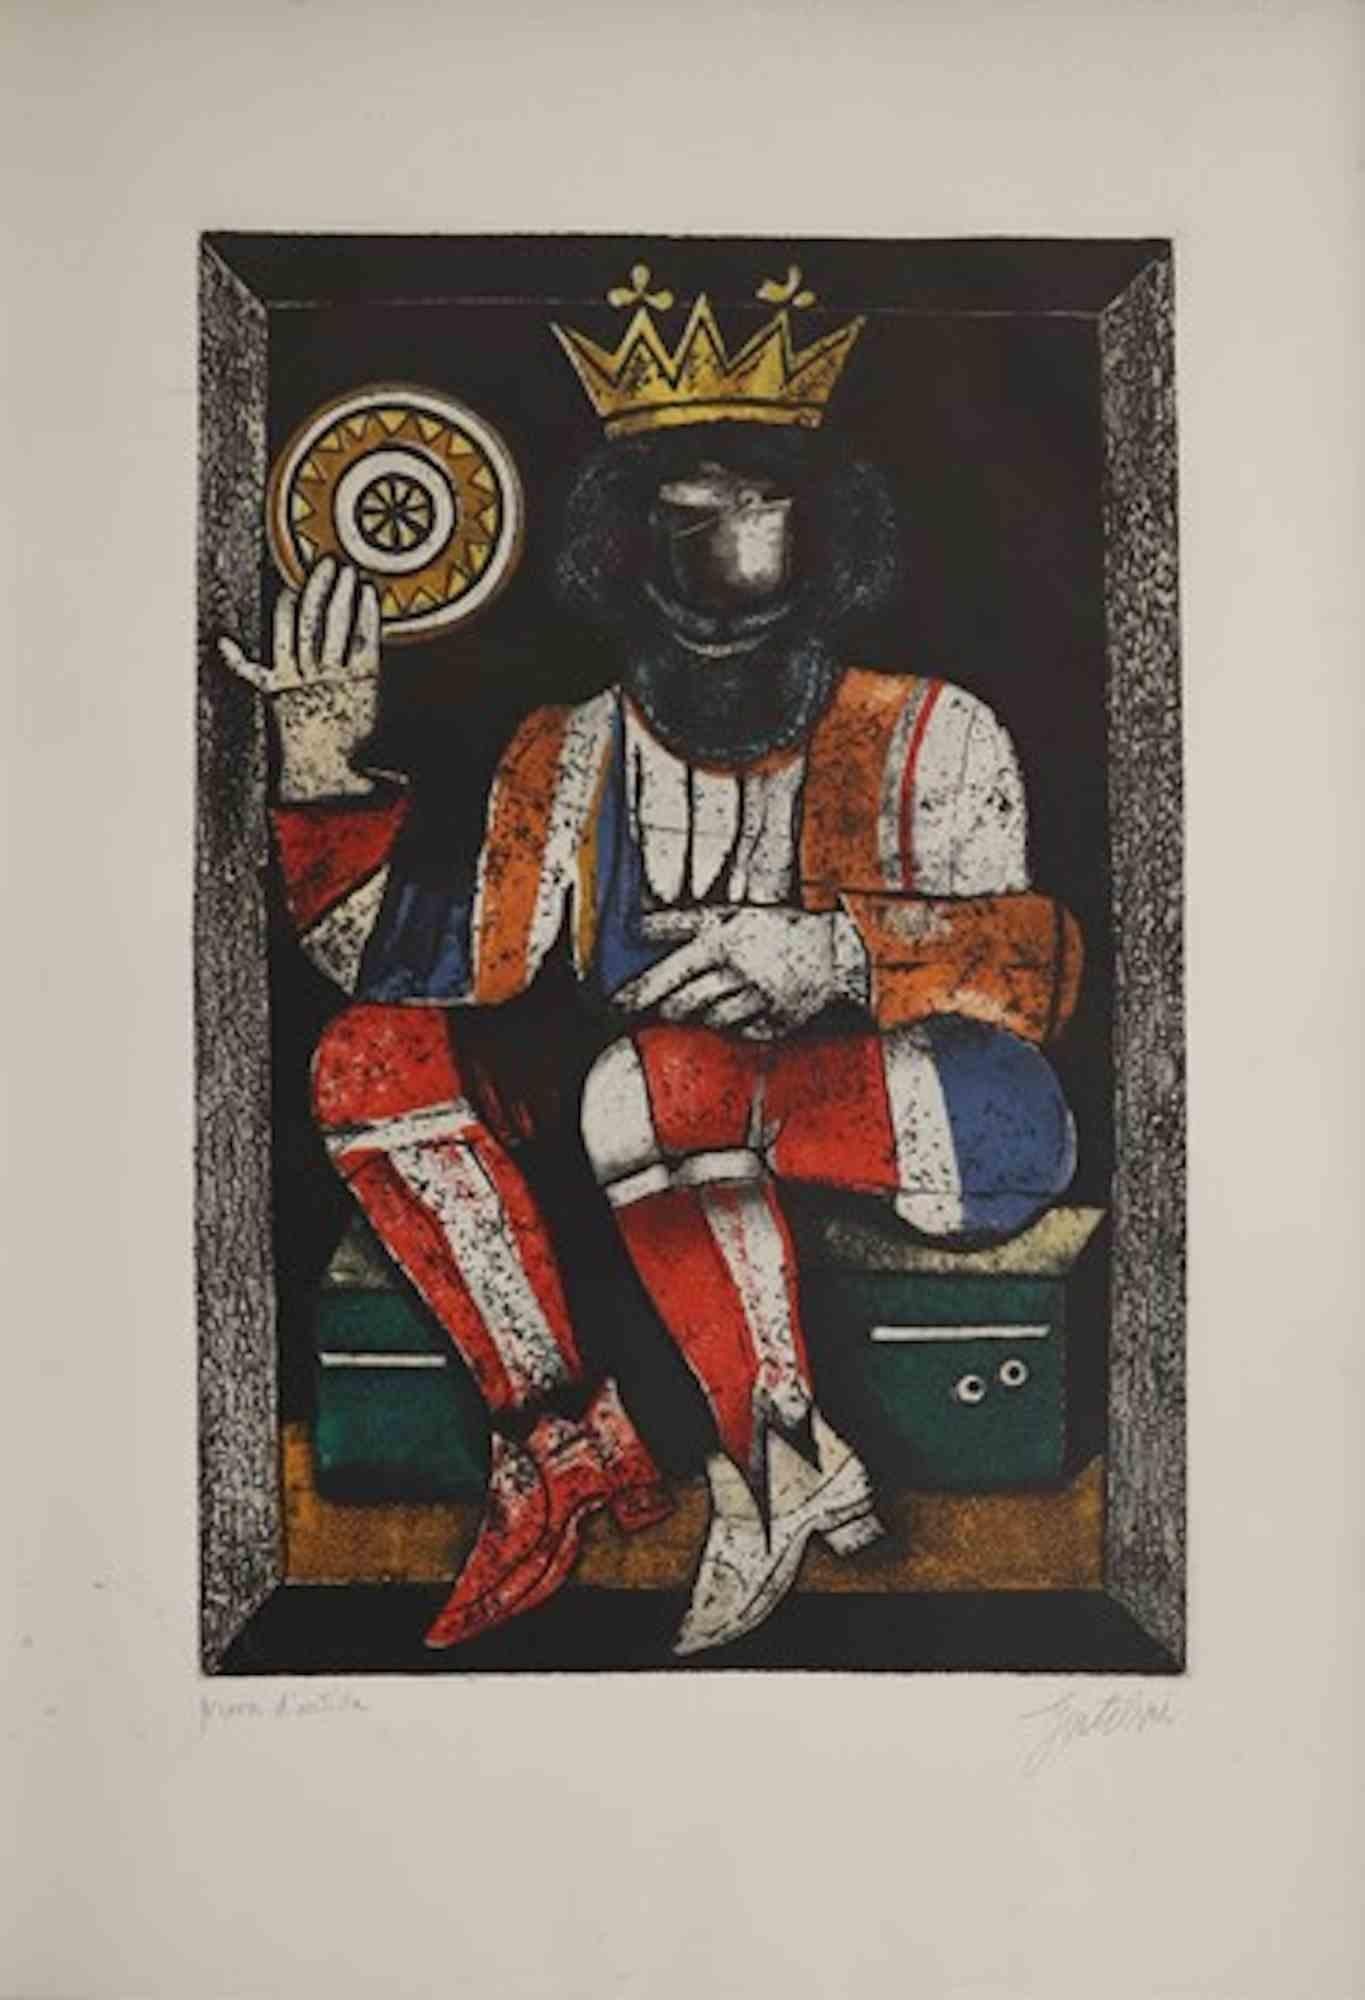 King of Coins is an etching realized by Franco Gentilini (Italian Painter, 1909-1981) in the 1970s.

The state of preservation of the artwork is good.

Hand-signed.

artist's proof.

Franco Gentilini (Italian Painter, 1909-1981): Gentilini's